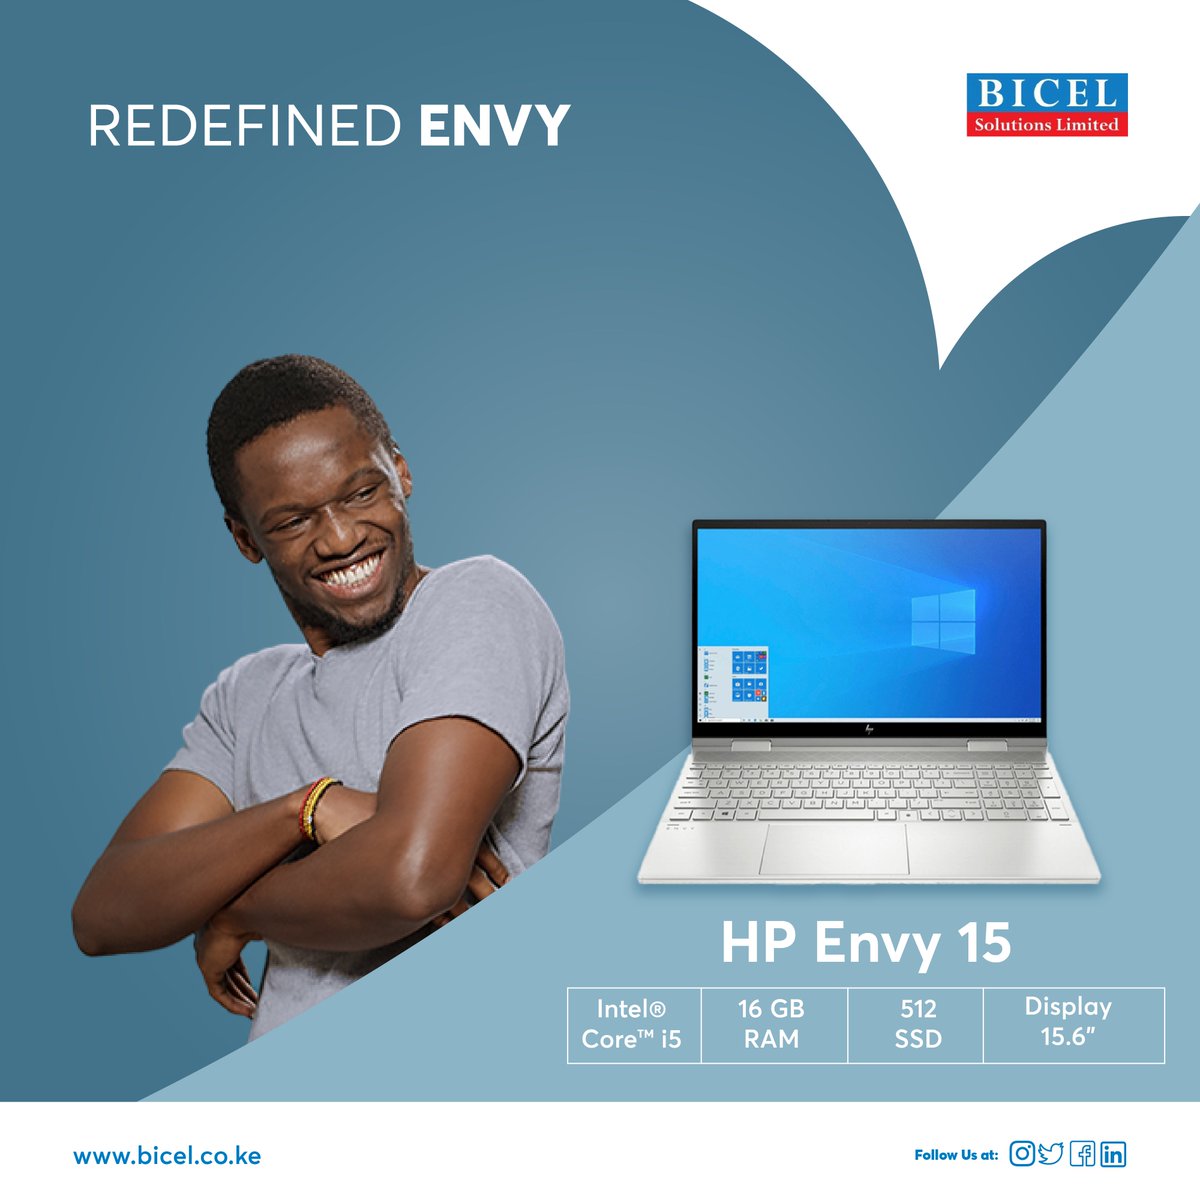 REDEFINED ENVY
Envy-Worthy Elegance and Power!✨💻 Experience the envy of innovation with HP ENVY. Get ready to be captivated by the ultimate computing experience.🌟🔥
🌐bicel.co.ke
#HPENVY #EleganceAndPower #InnovationAtItsFinest #EmbraceTheExcellence #BicelSolutions